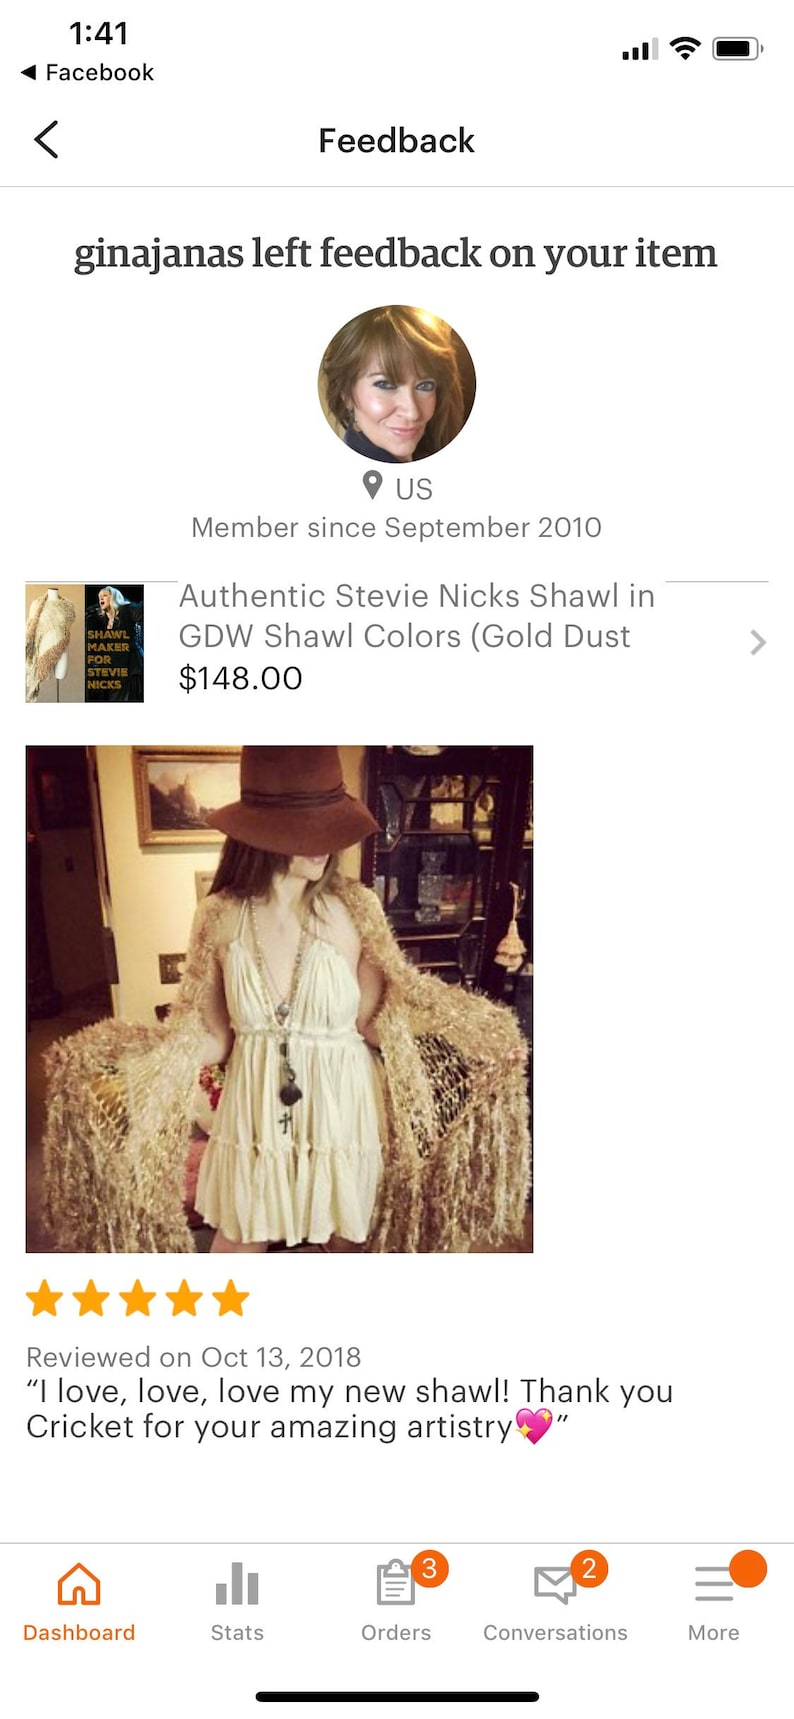 Authentic Stevie Nicks Shawl in GDW Shawl Colors Gold Dust Woman Shawl Gold Shawl with Fringe Designer Stevie Nicks Shawl Contest Winner image 10